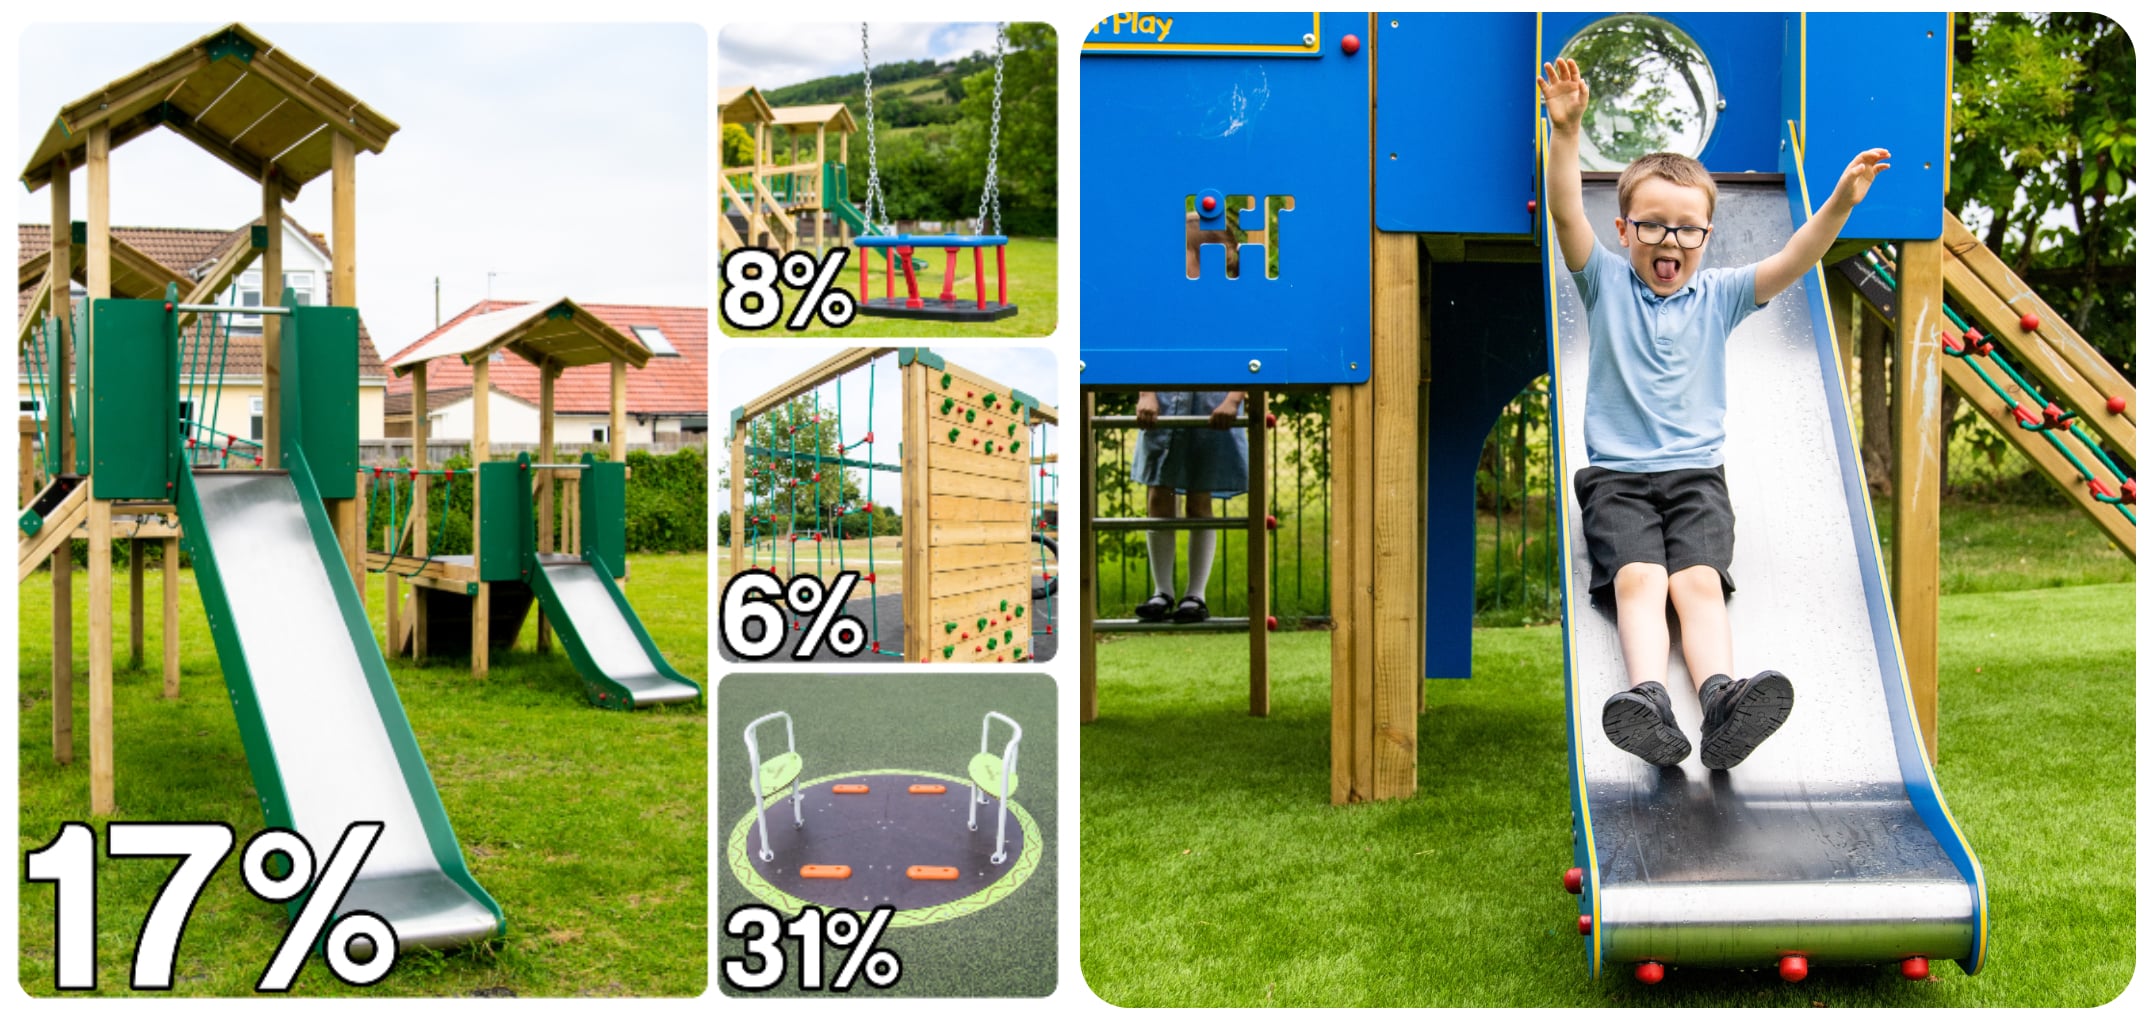 Images of playground equipment with percentages next to each revealing how much use they get plus an image of a child shooting down a slide